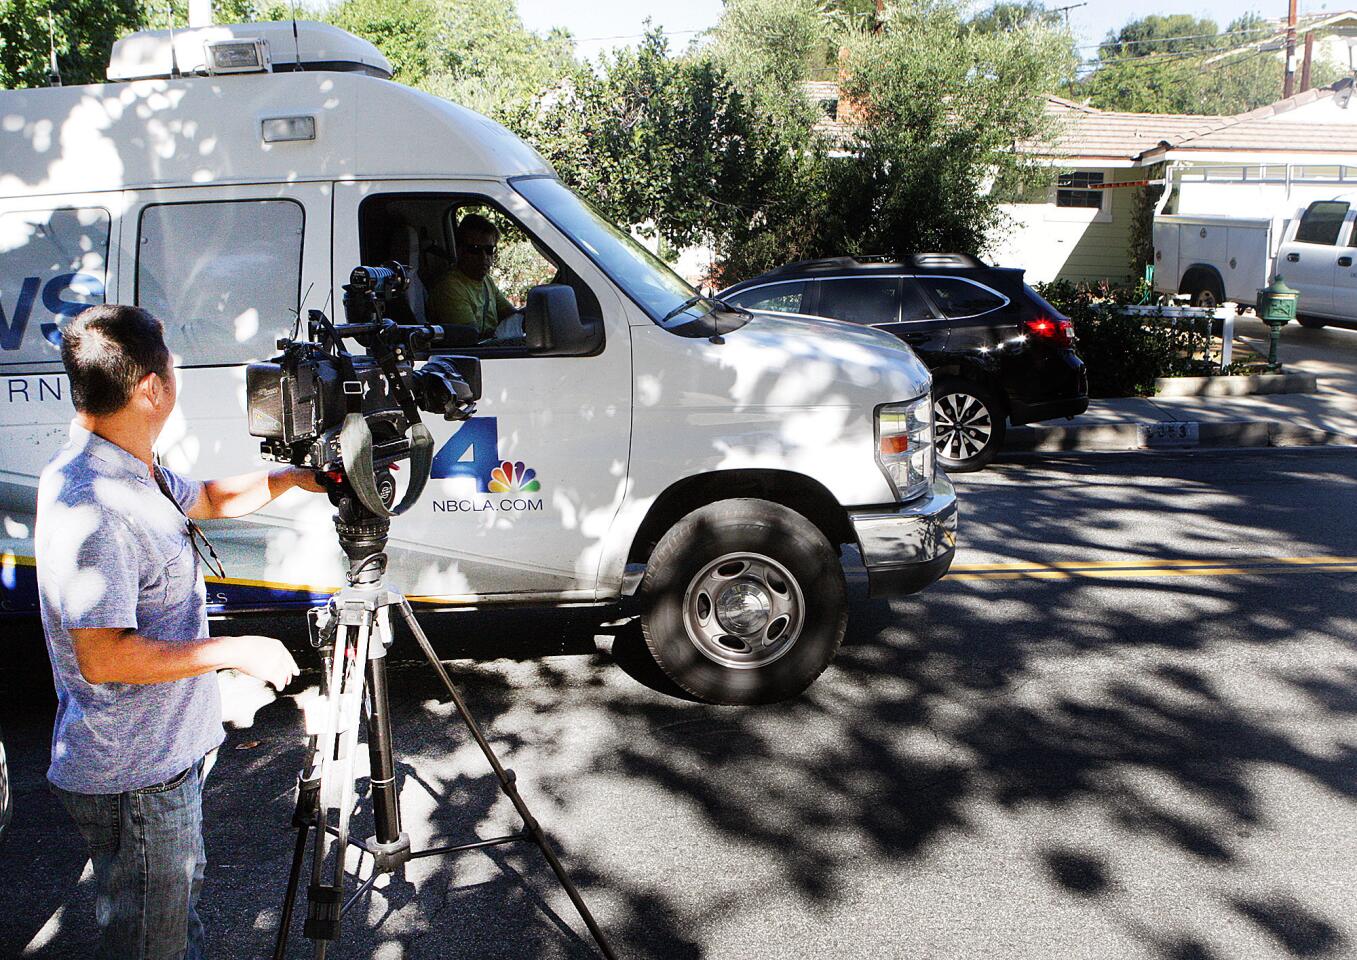 News media, preparing to set up for the rest of the day until the 6:00 P.M. news, position across the street from the scene of a murder-suicide on the 5000 block of Crown Avenue in La Canada Flintrdige on Monday, September 7, 2015. Last night, a Los Angeles County Firefighter shot and killed his Los Angeles County Sheriff's Department wife, then killed himself.